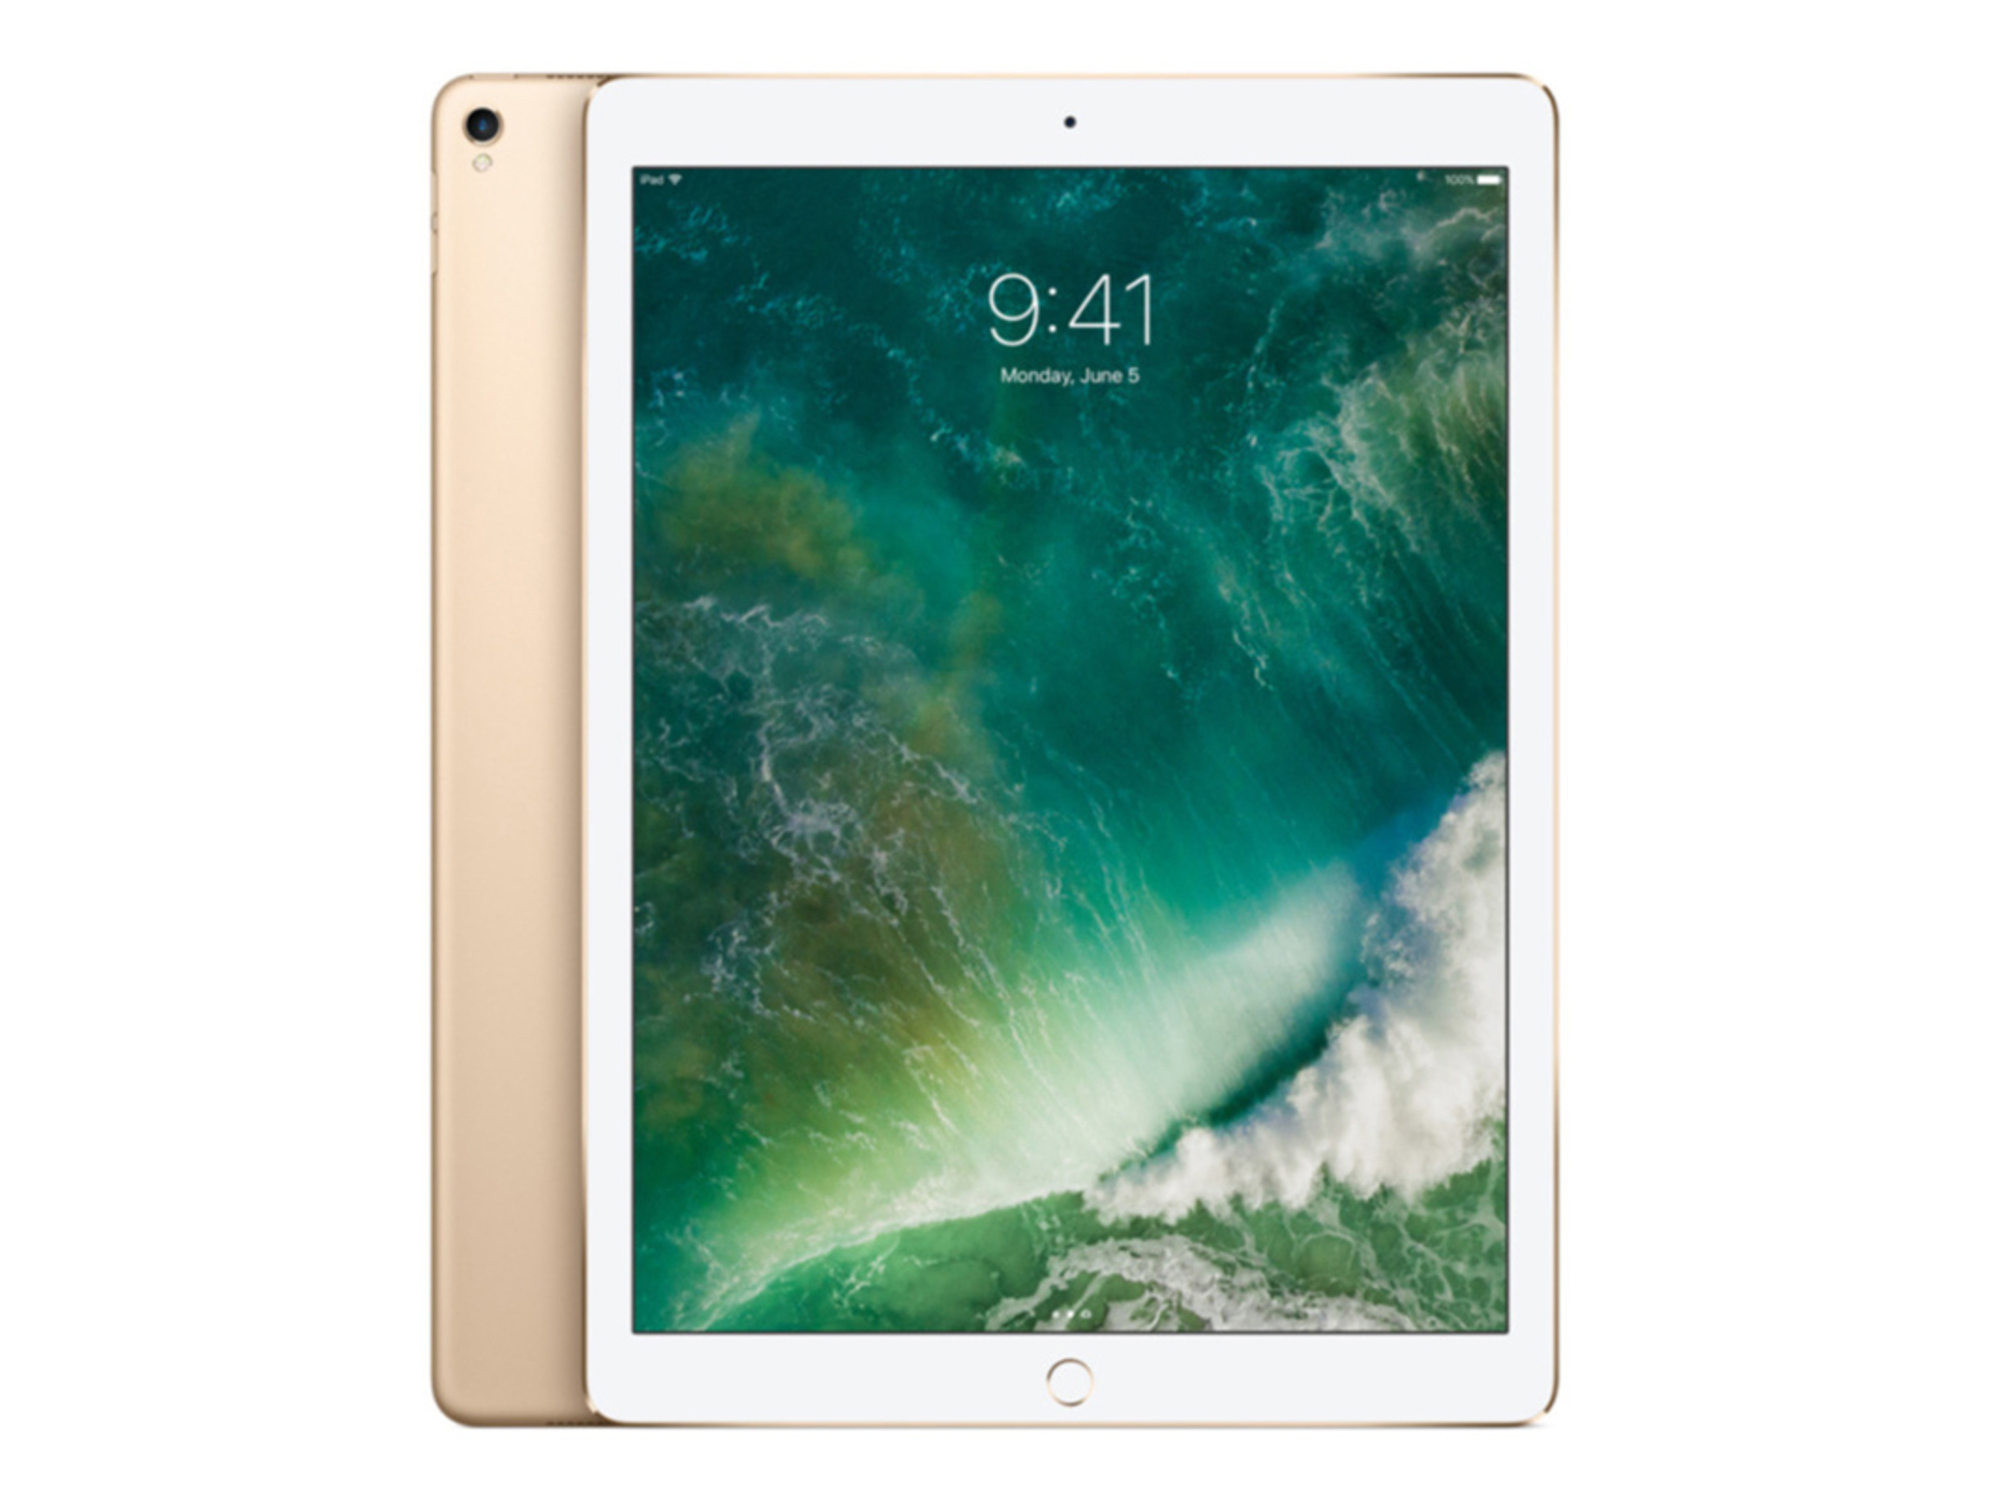 Outsmart inflation by scoring this like-new iPad Pro for a fraction of the price you’d pay buying new